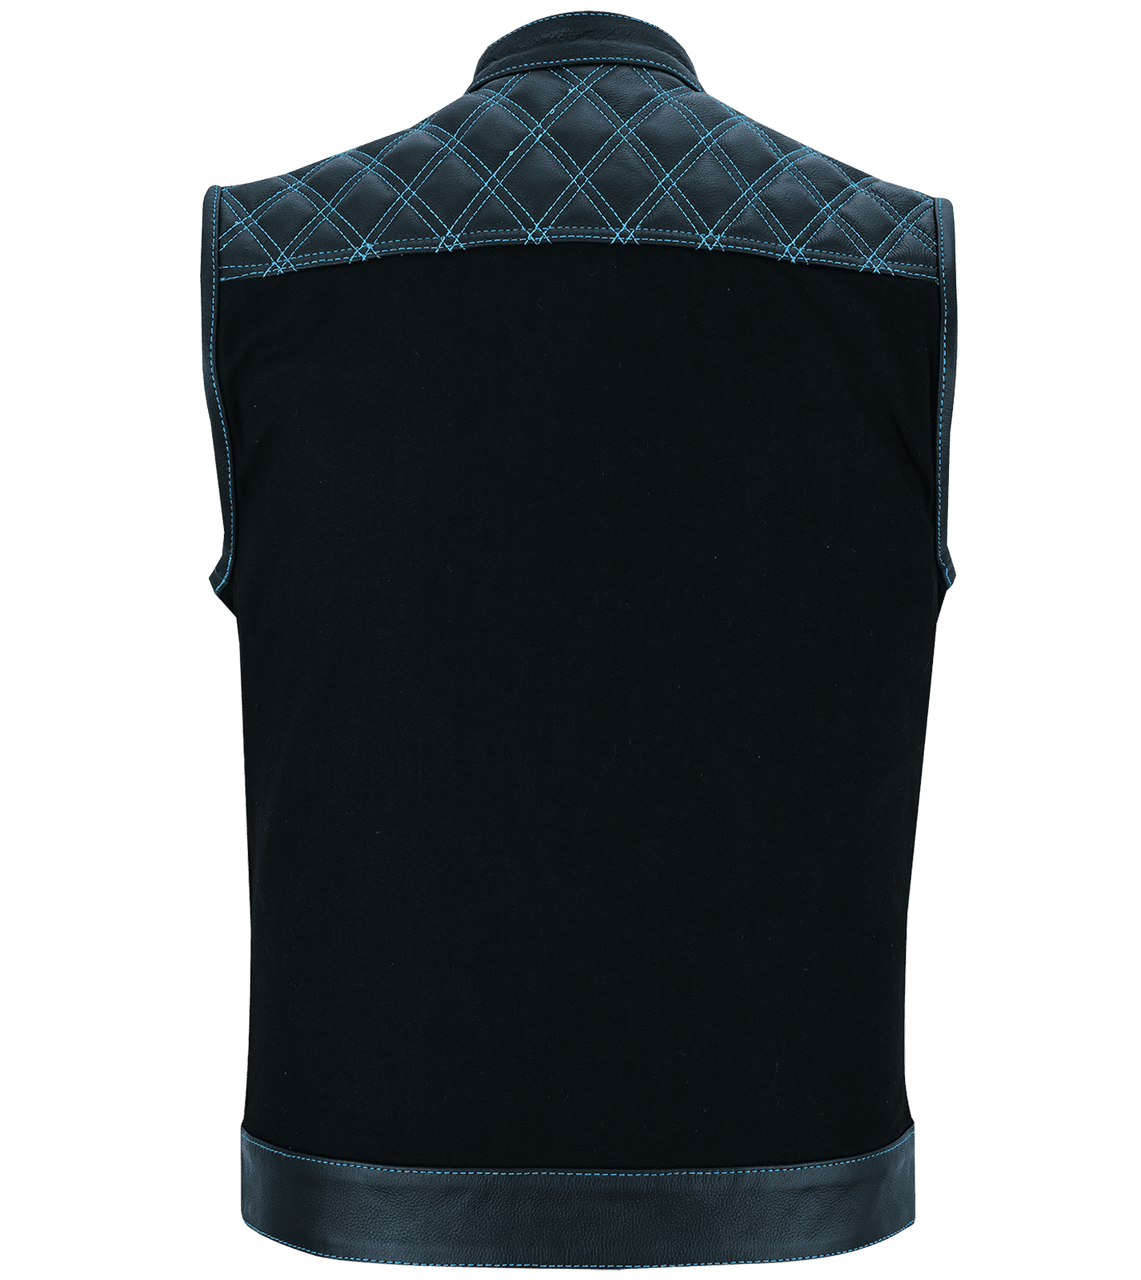 Vance-Leathers-VB924BL-Men's-Denim-Leather-Motorcycle-Vest-with-Blue-Stitching-back-view